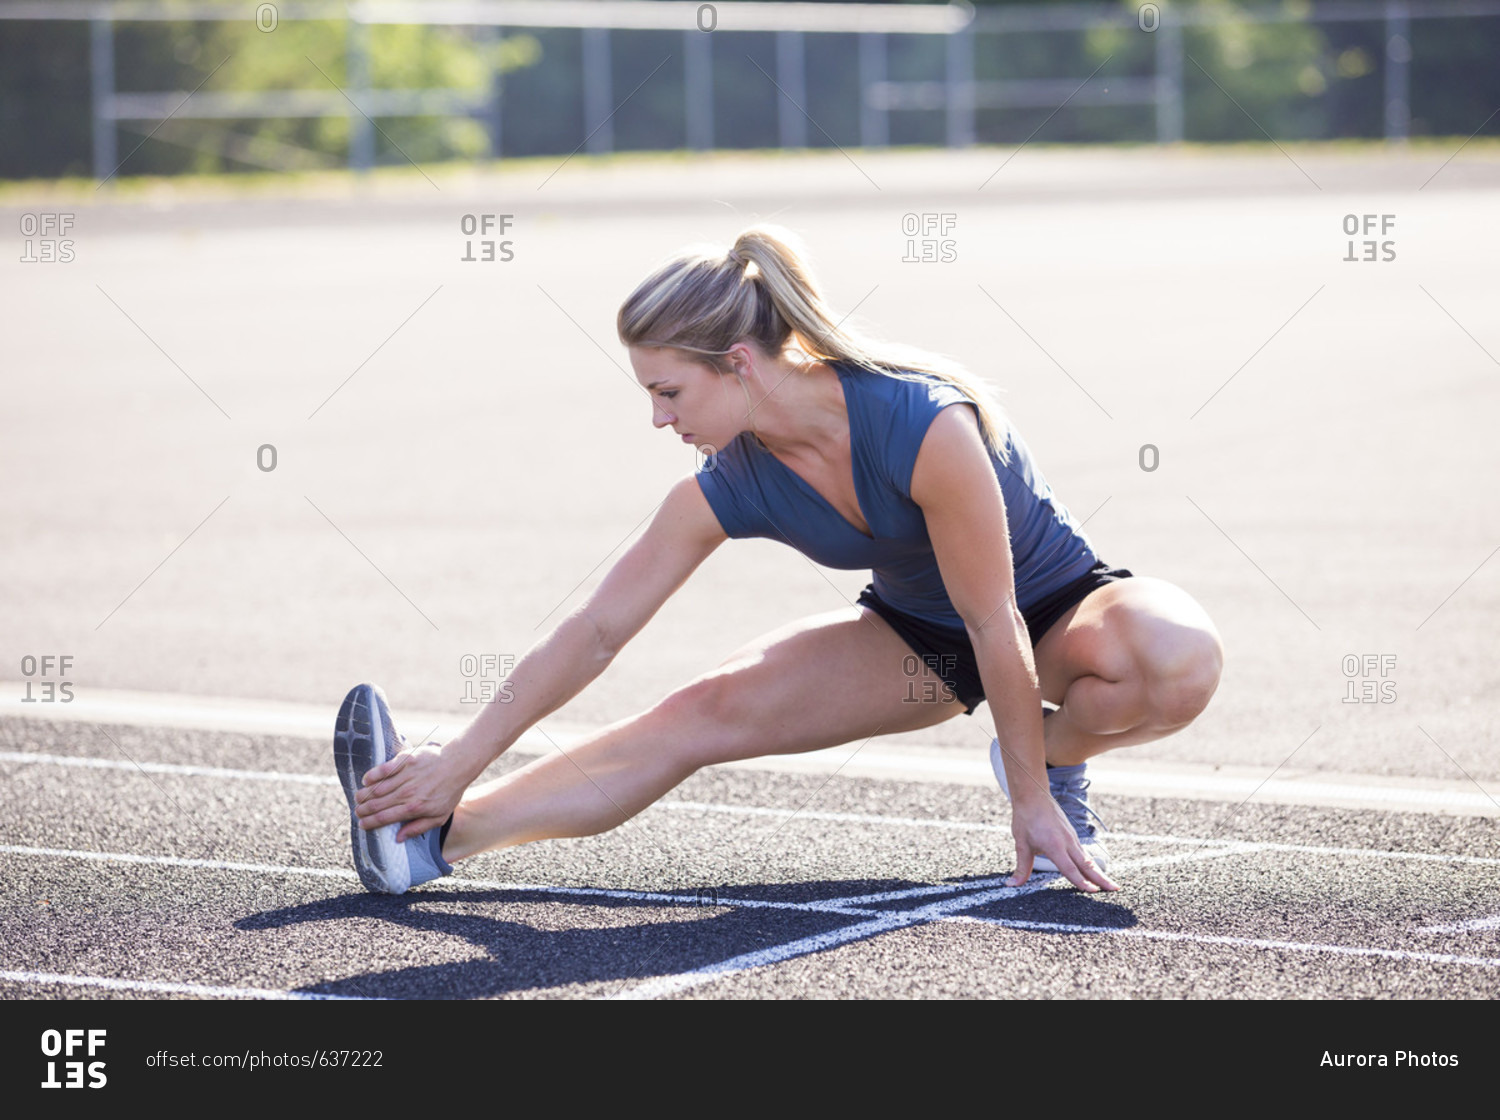 Female runner with blonde hair and ponytail stretching before running on track, Eugene, Oregon, USA